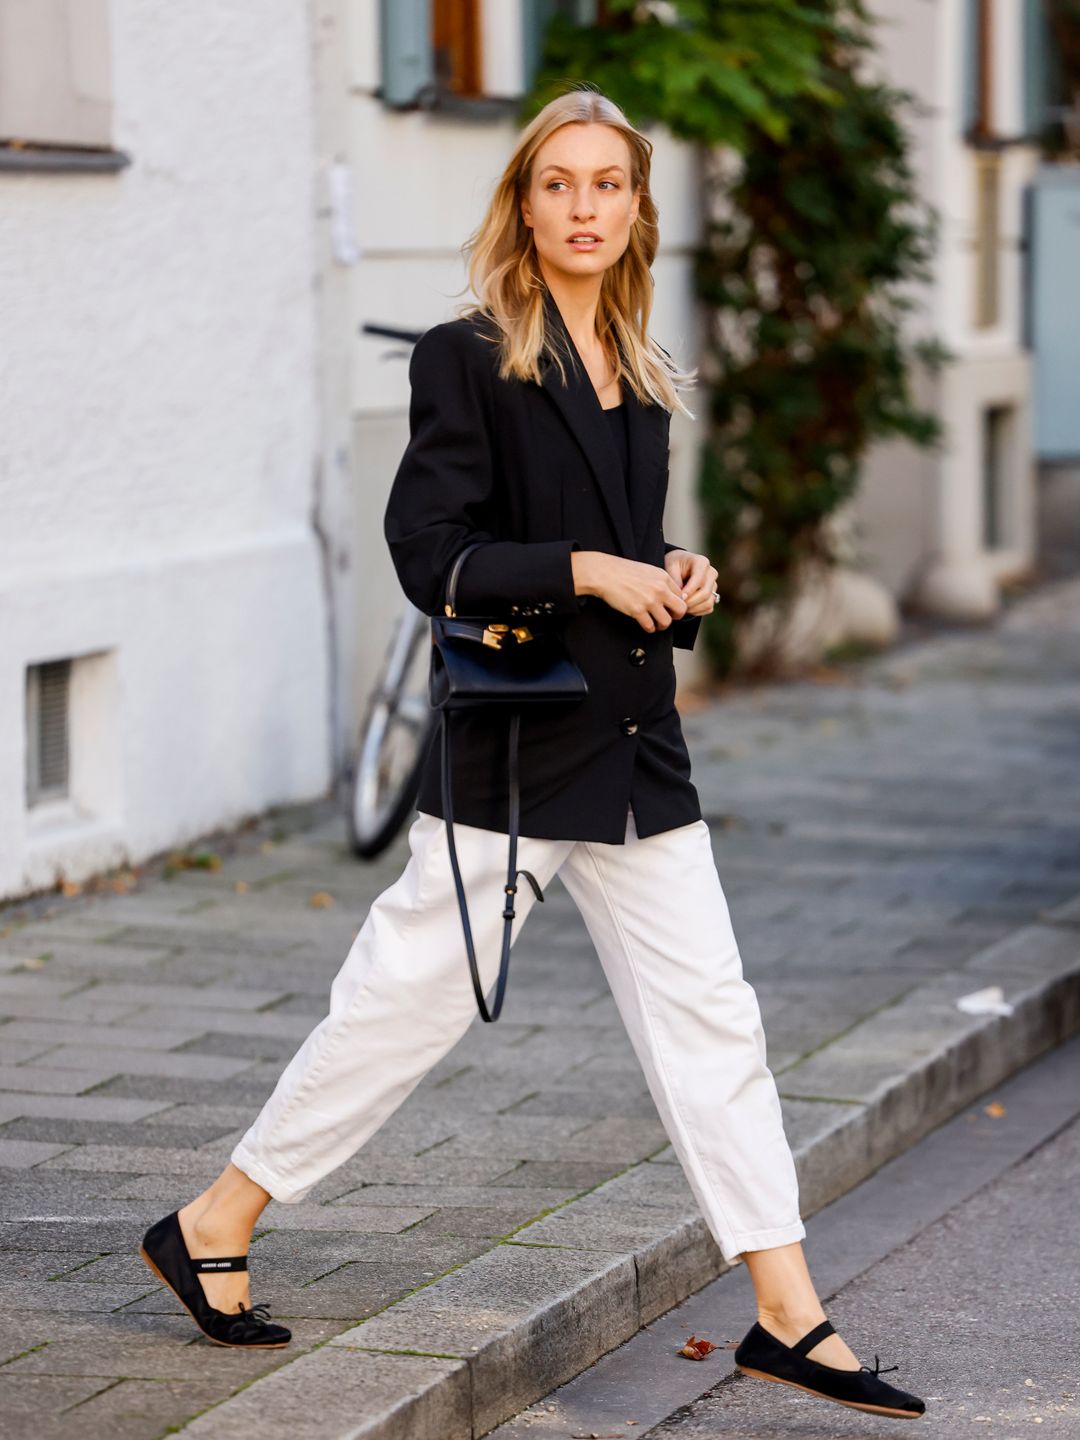 Marlies-Pia Pfeiffhofer wears a black blazer, white cropped trousers and ballet flats 